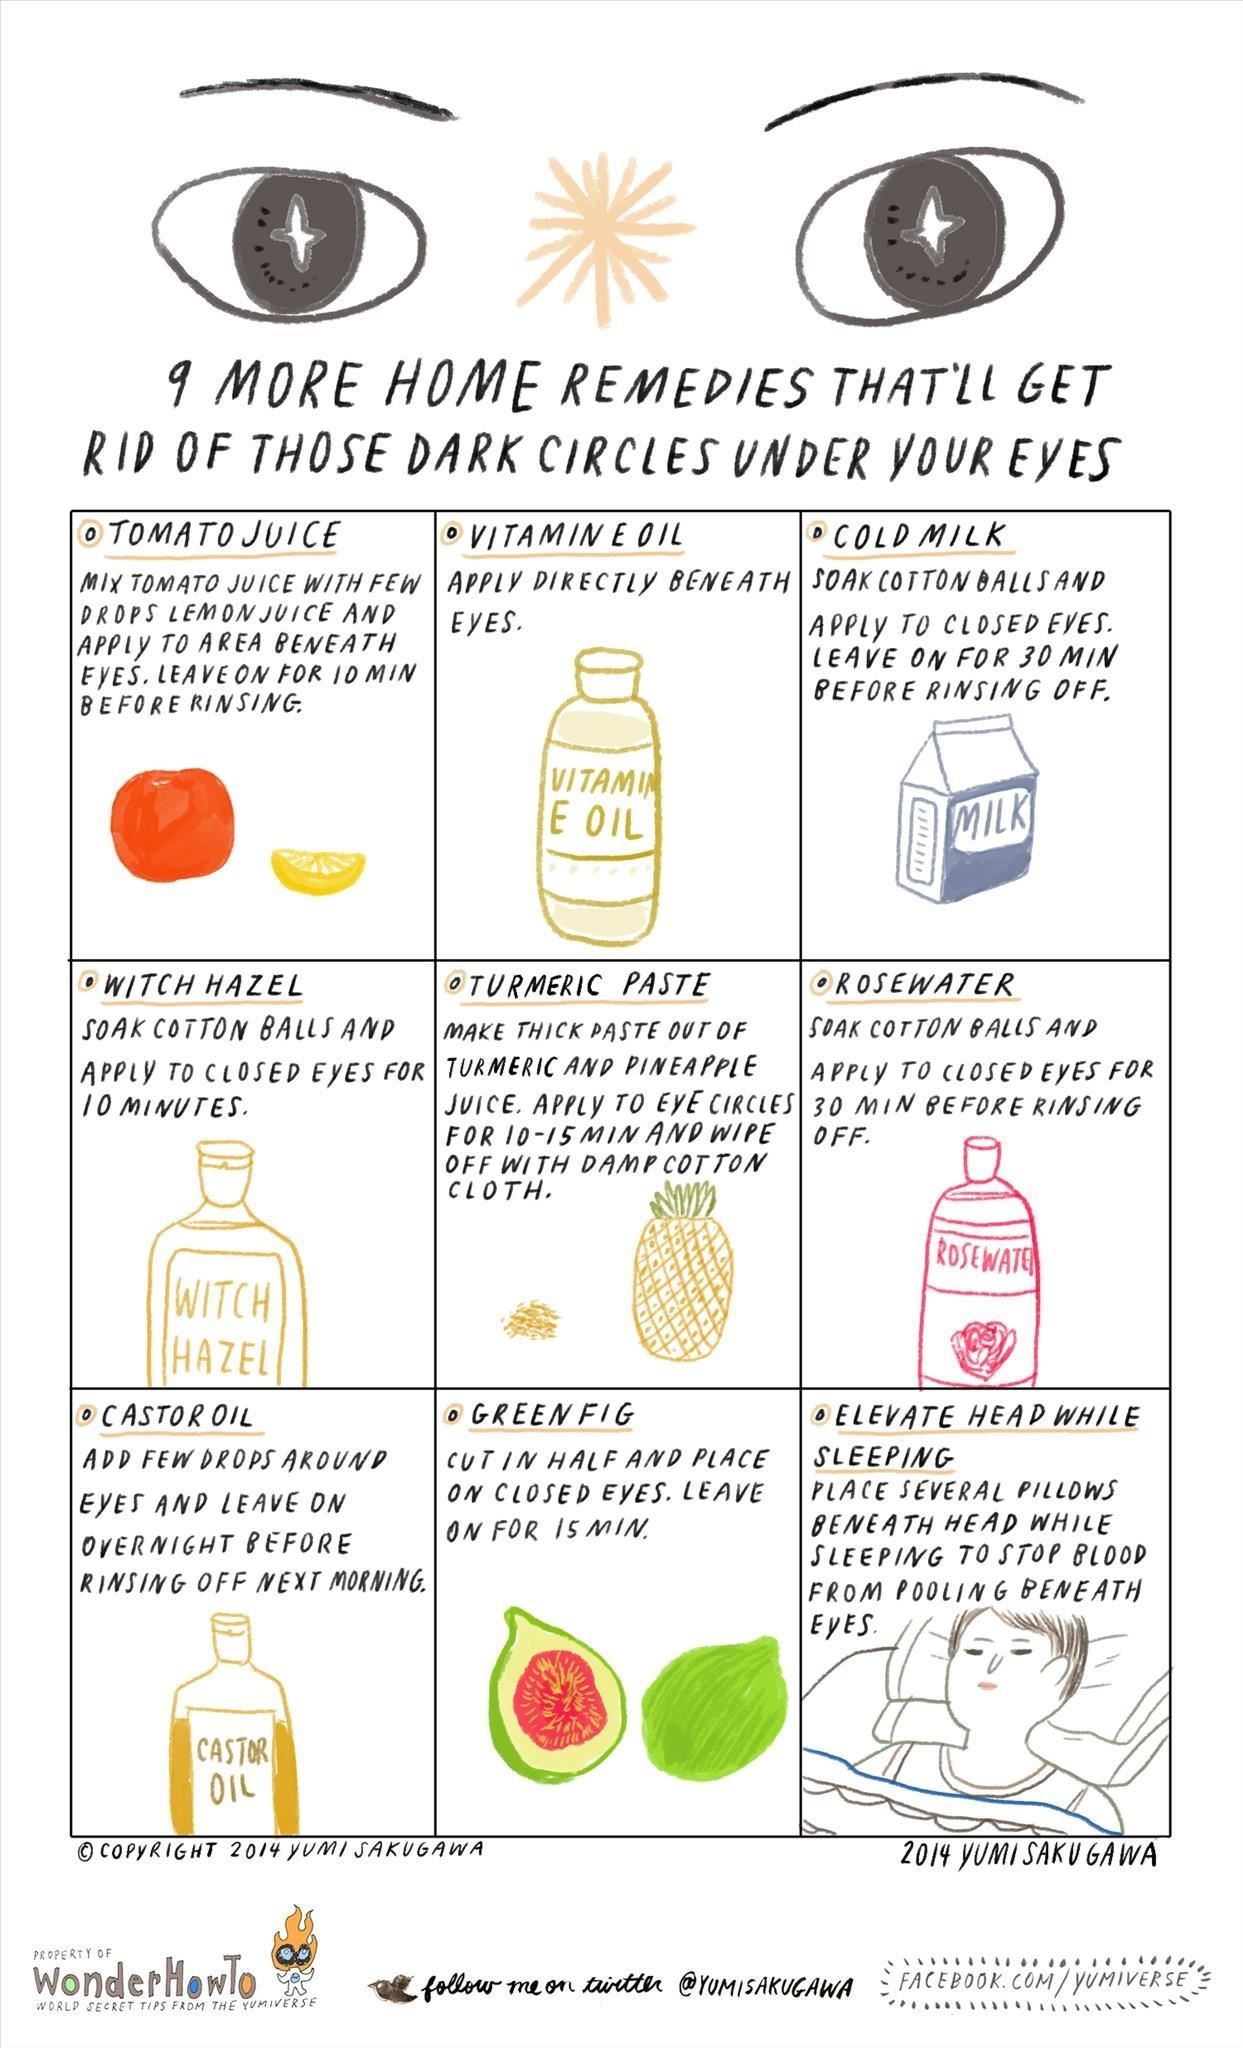 9 More Home Remedies That'll Get Rid of Those Dark Circles Under Your Eyes